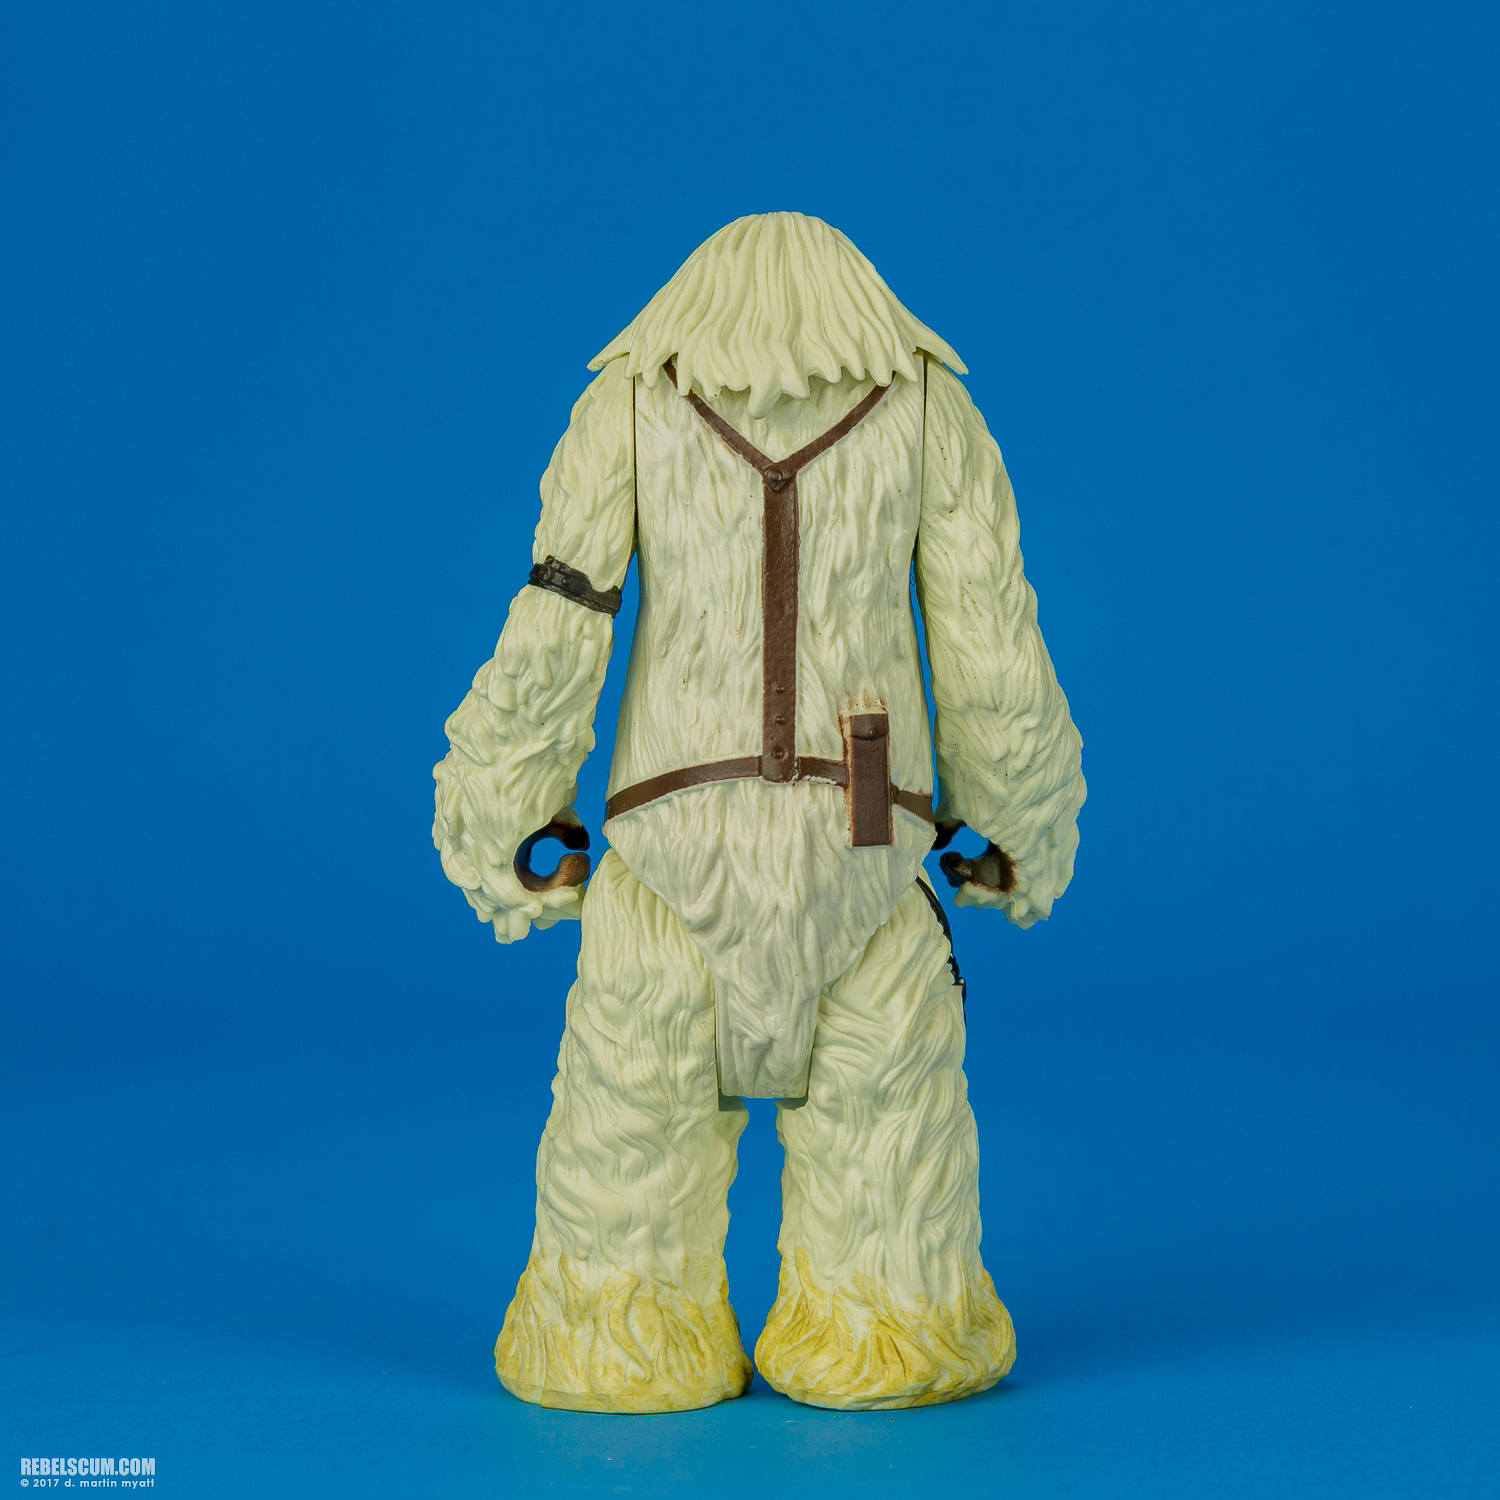 Kohls-Exclusive-Four-Pack-Rogue-One-B9605-033.jpg